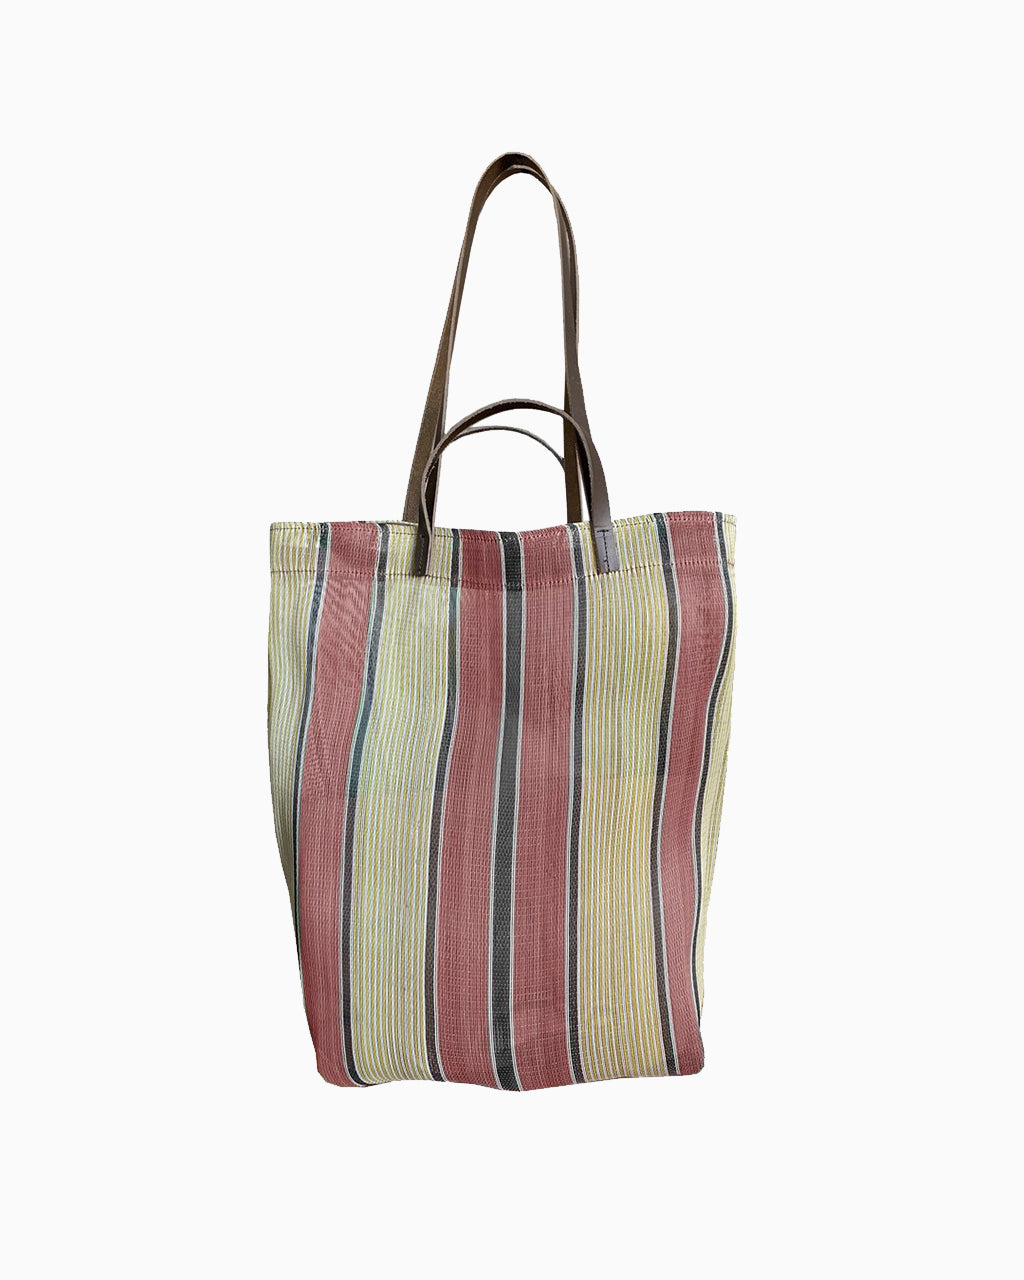 Spencer Devine Assam Market Bag Small - Made with 100% Recycled Plastic